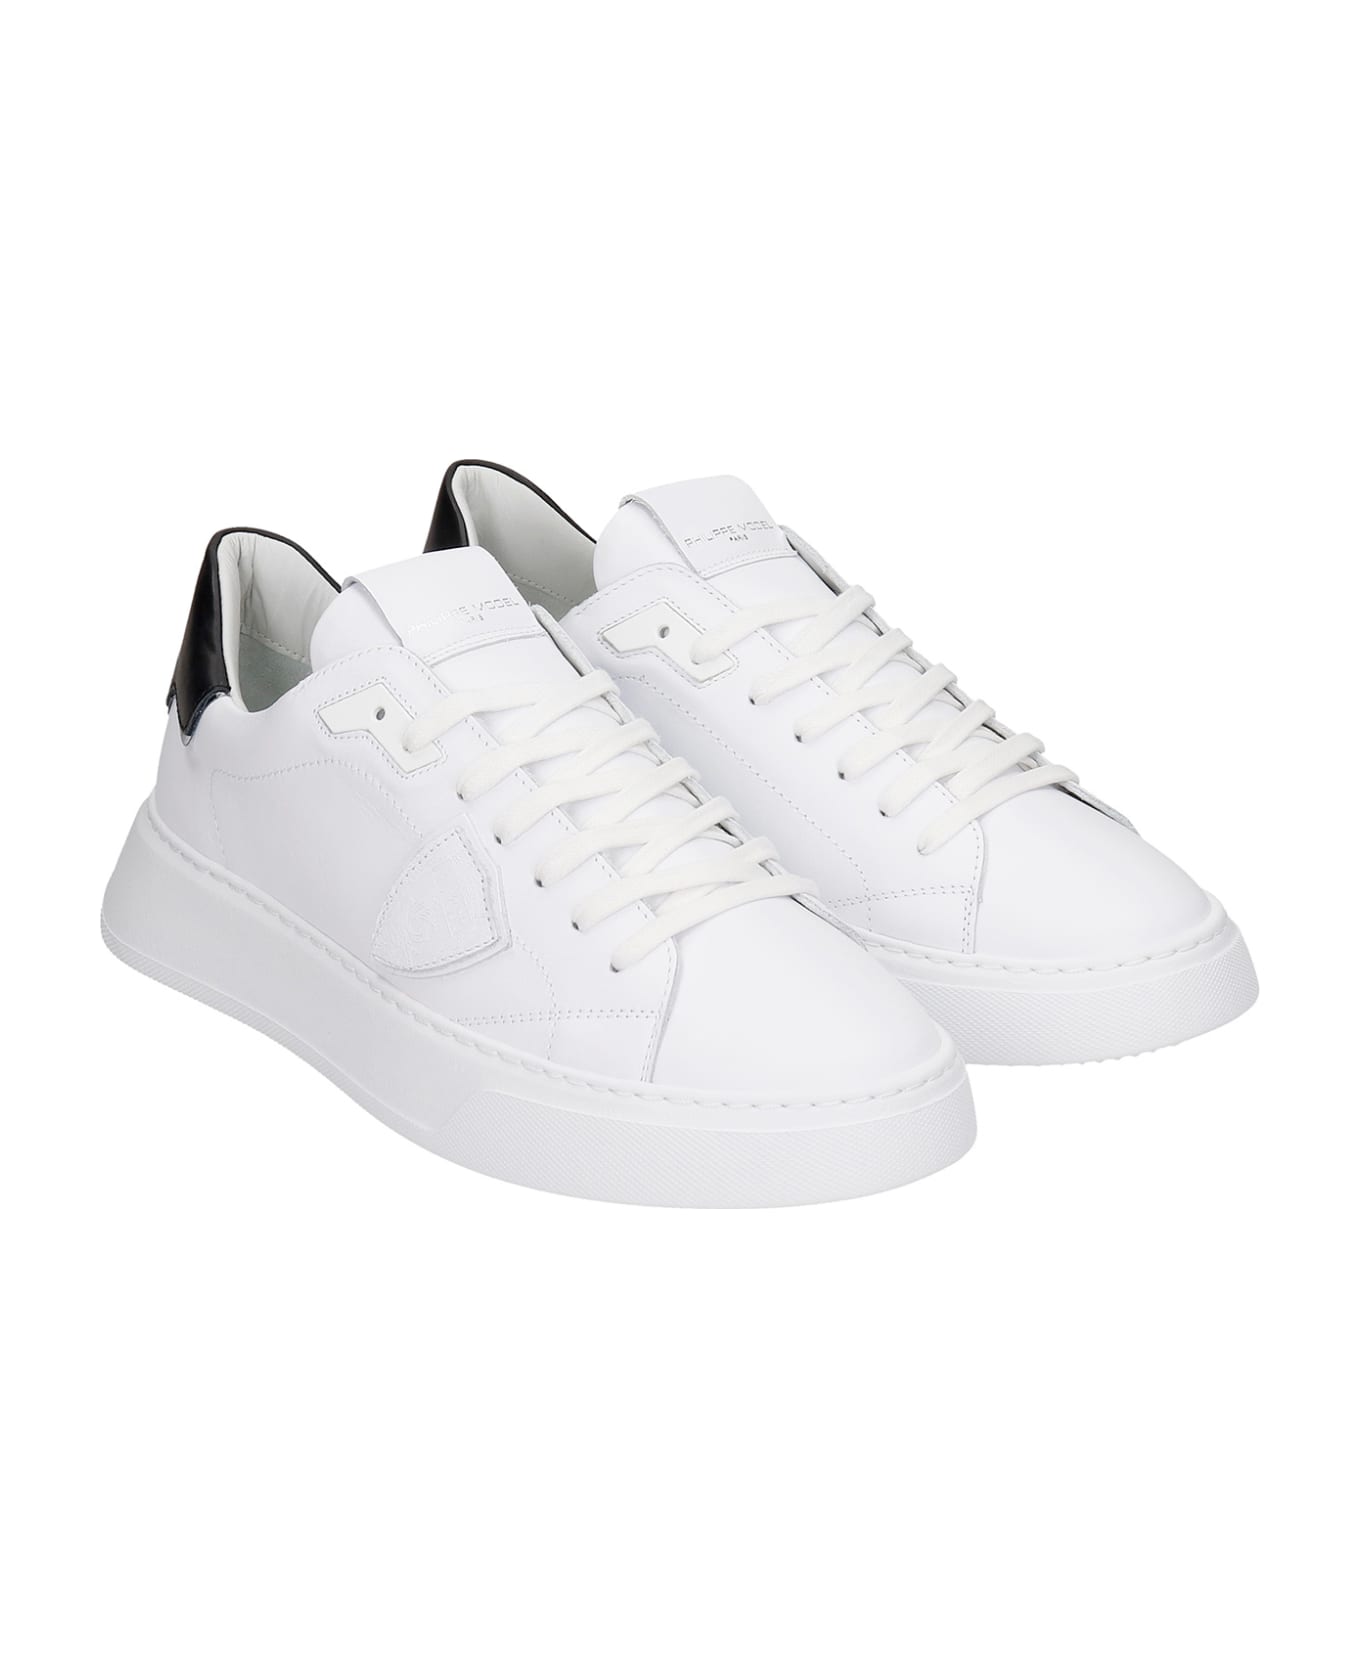 Philippe Model Temple Sneakers In White Leather - Veau Blanc Noir スニーカー